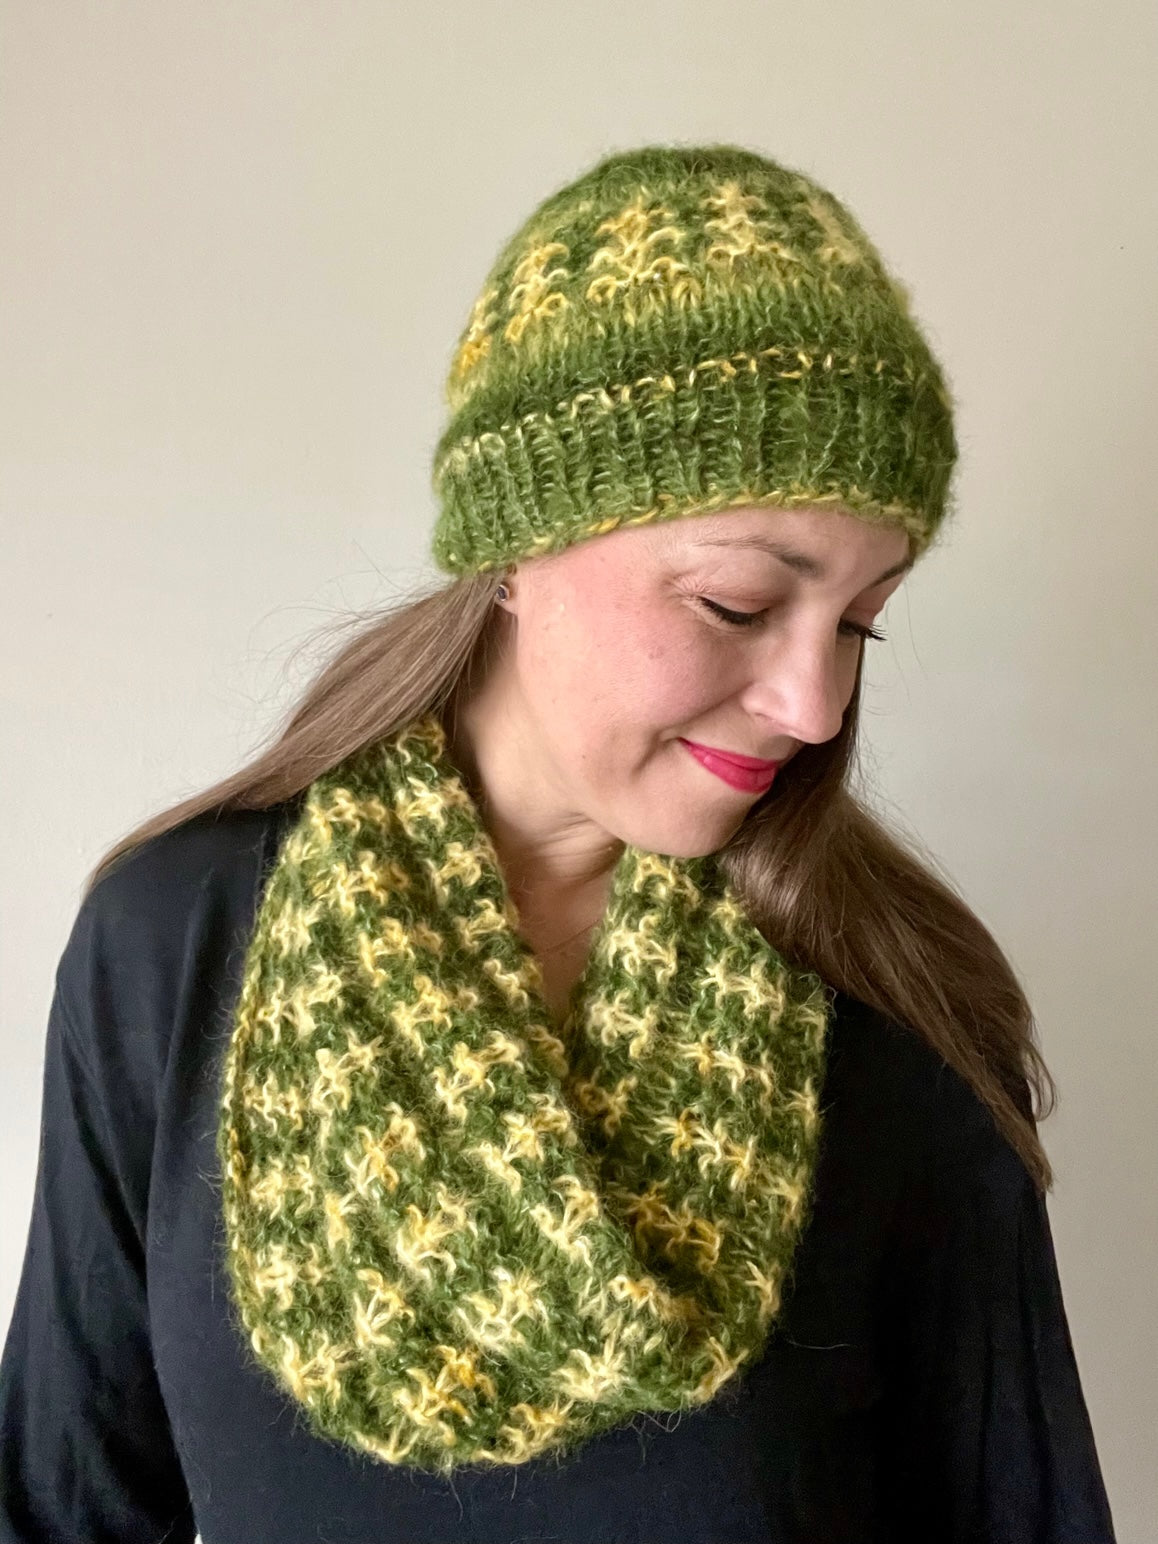 MARQUIS HAT & COWL KIT designed by Jill at Knit Sisu